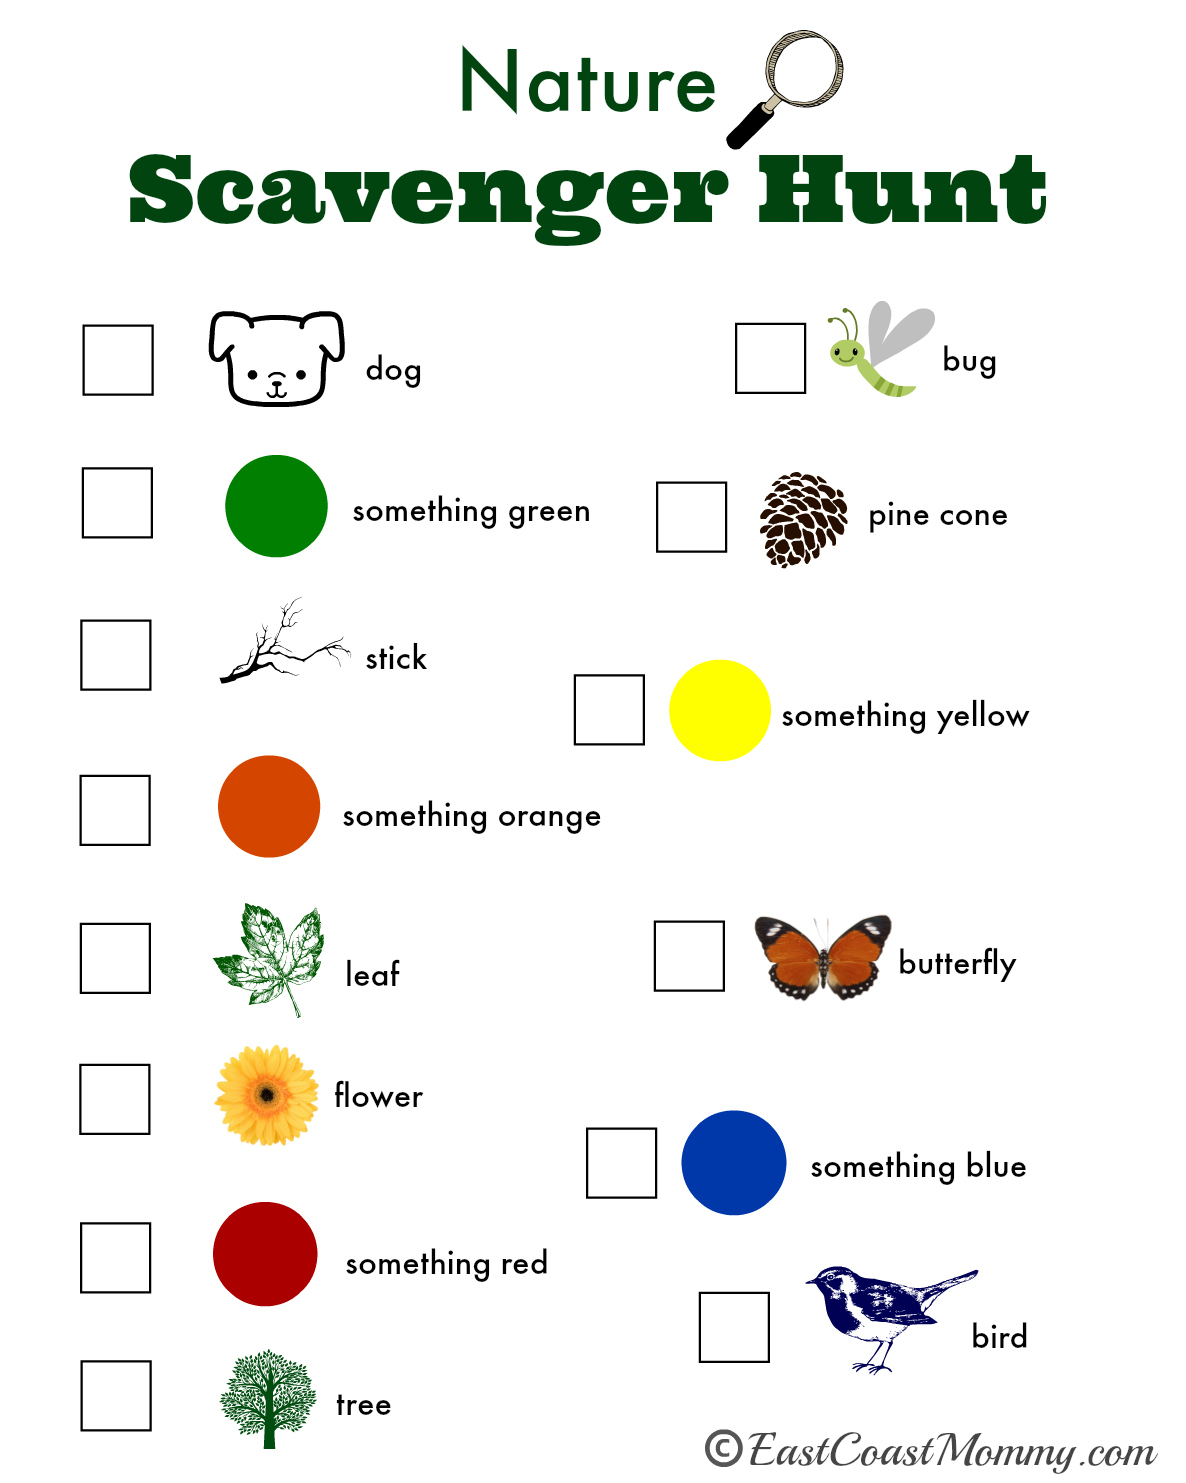 East Coast Mommy Nature Scavenger Hunt with Free Printable 